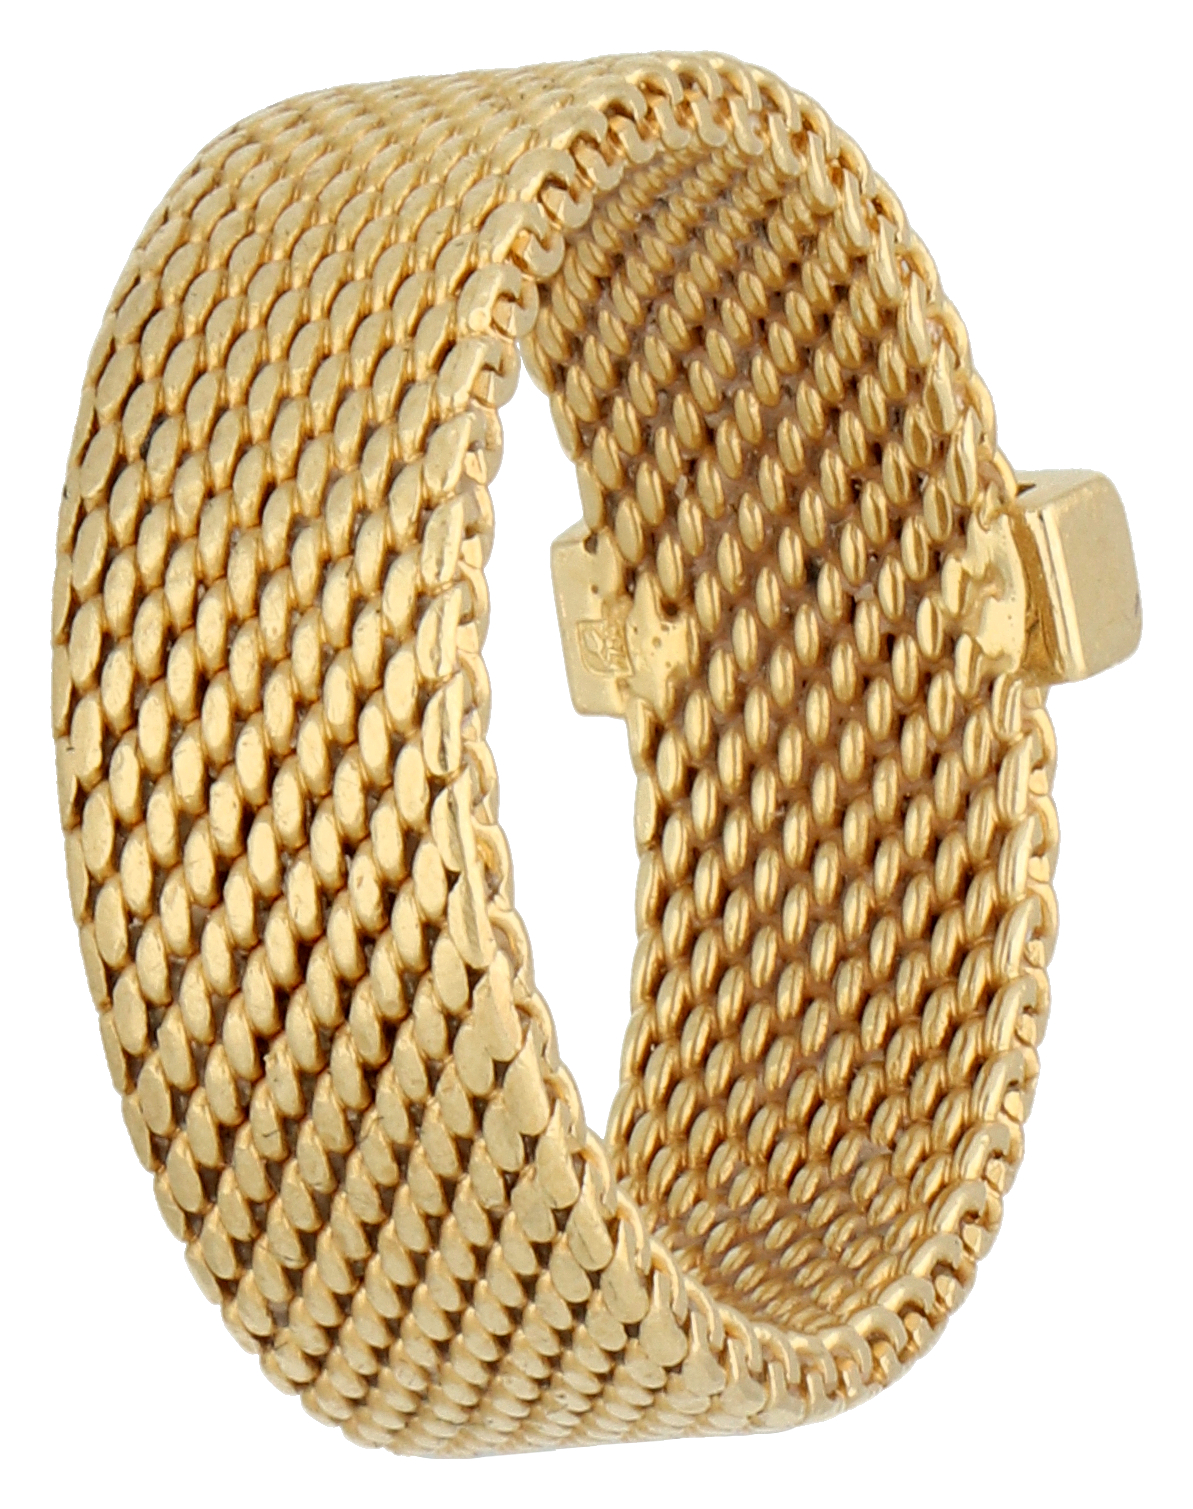 No Reserve - Tiffany & Co 18K yellow gold mesh ring set with approx. 0.04 ct. diamond. - Image 2 of 3